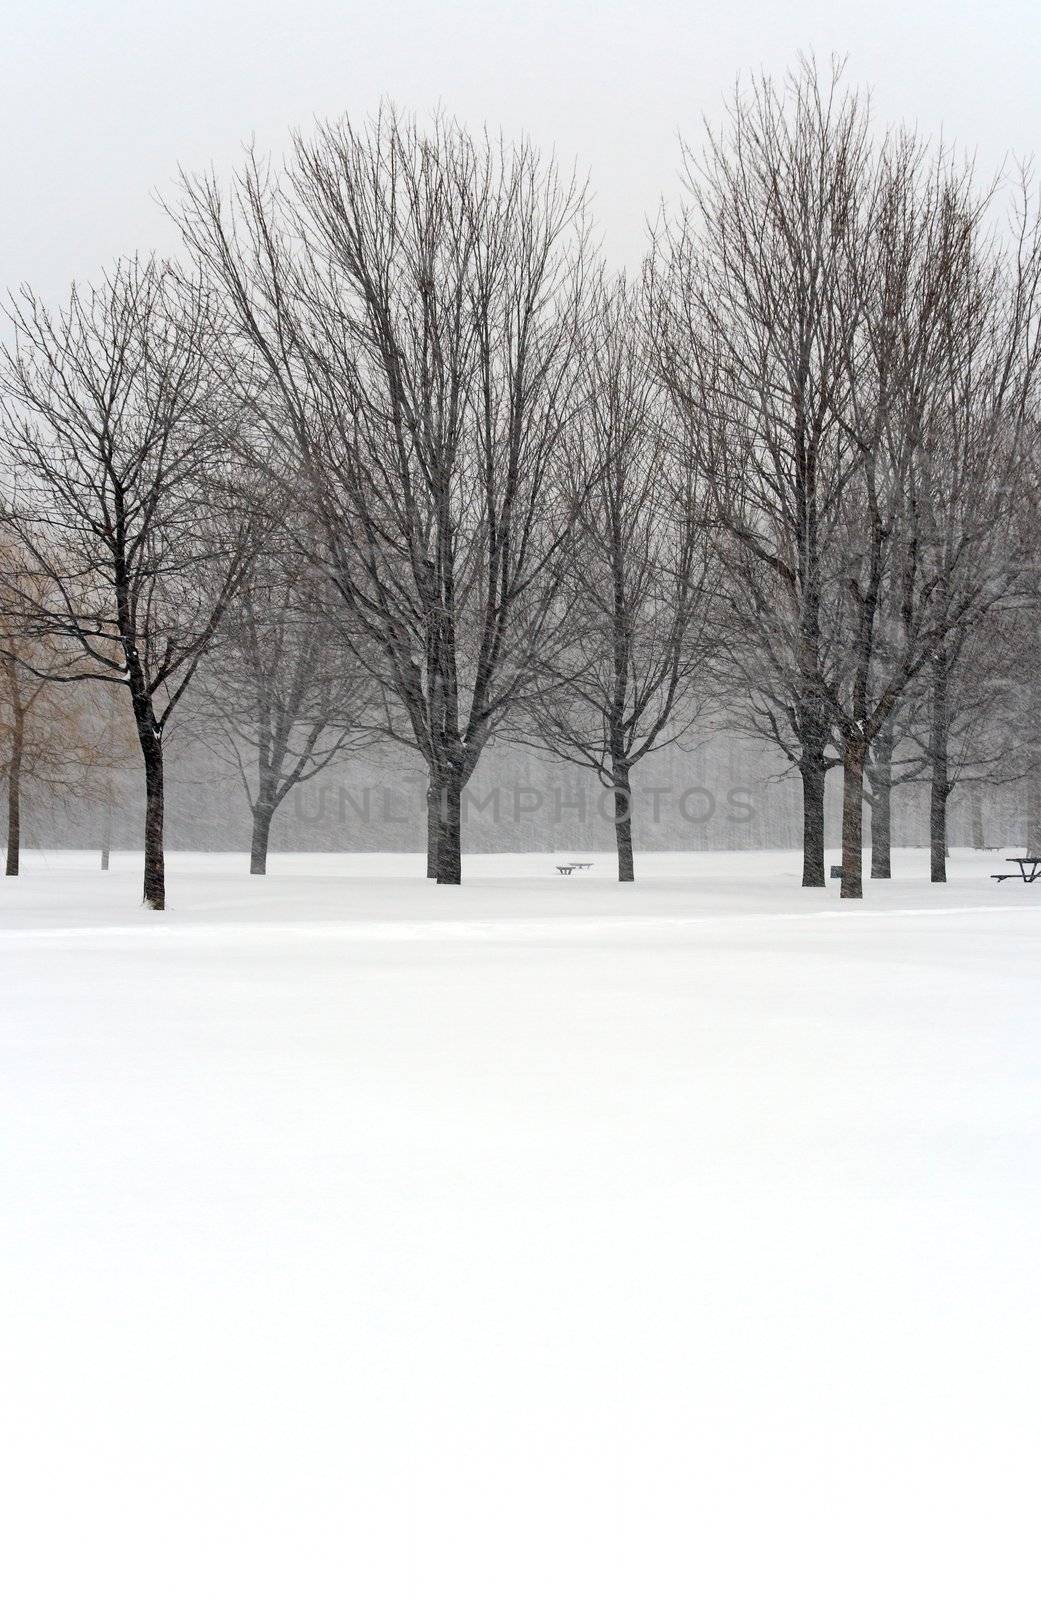 Trees in snow during winter blizzard.